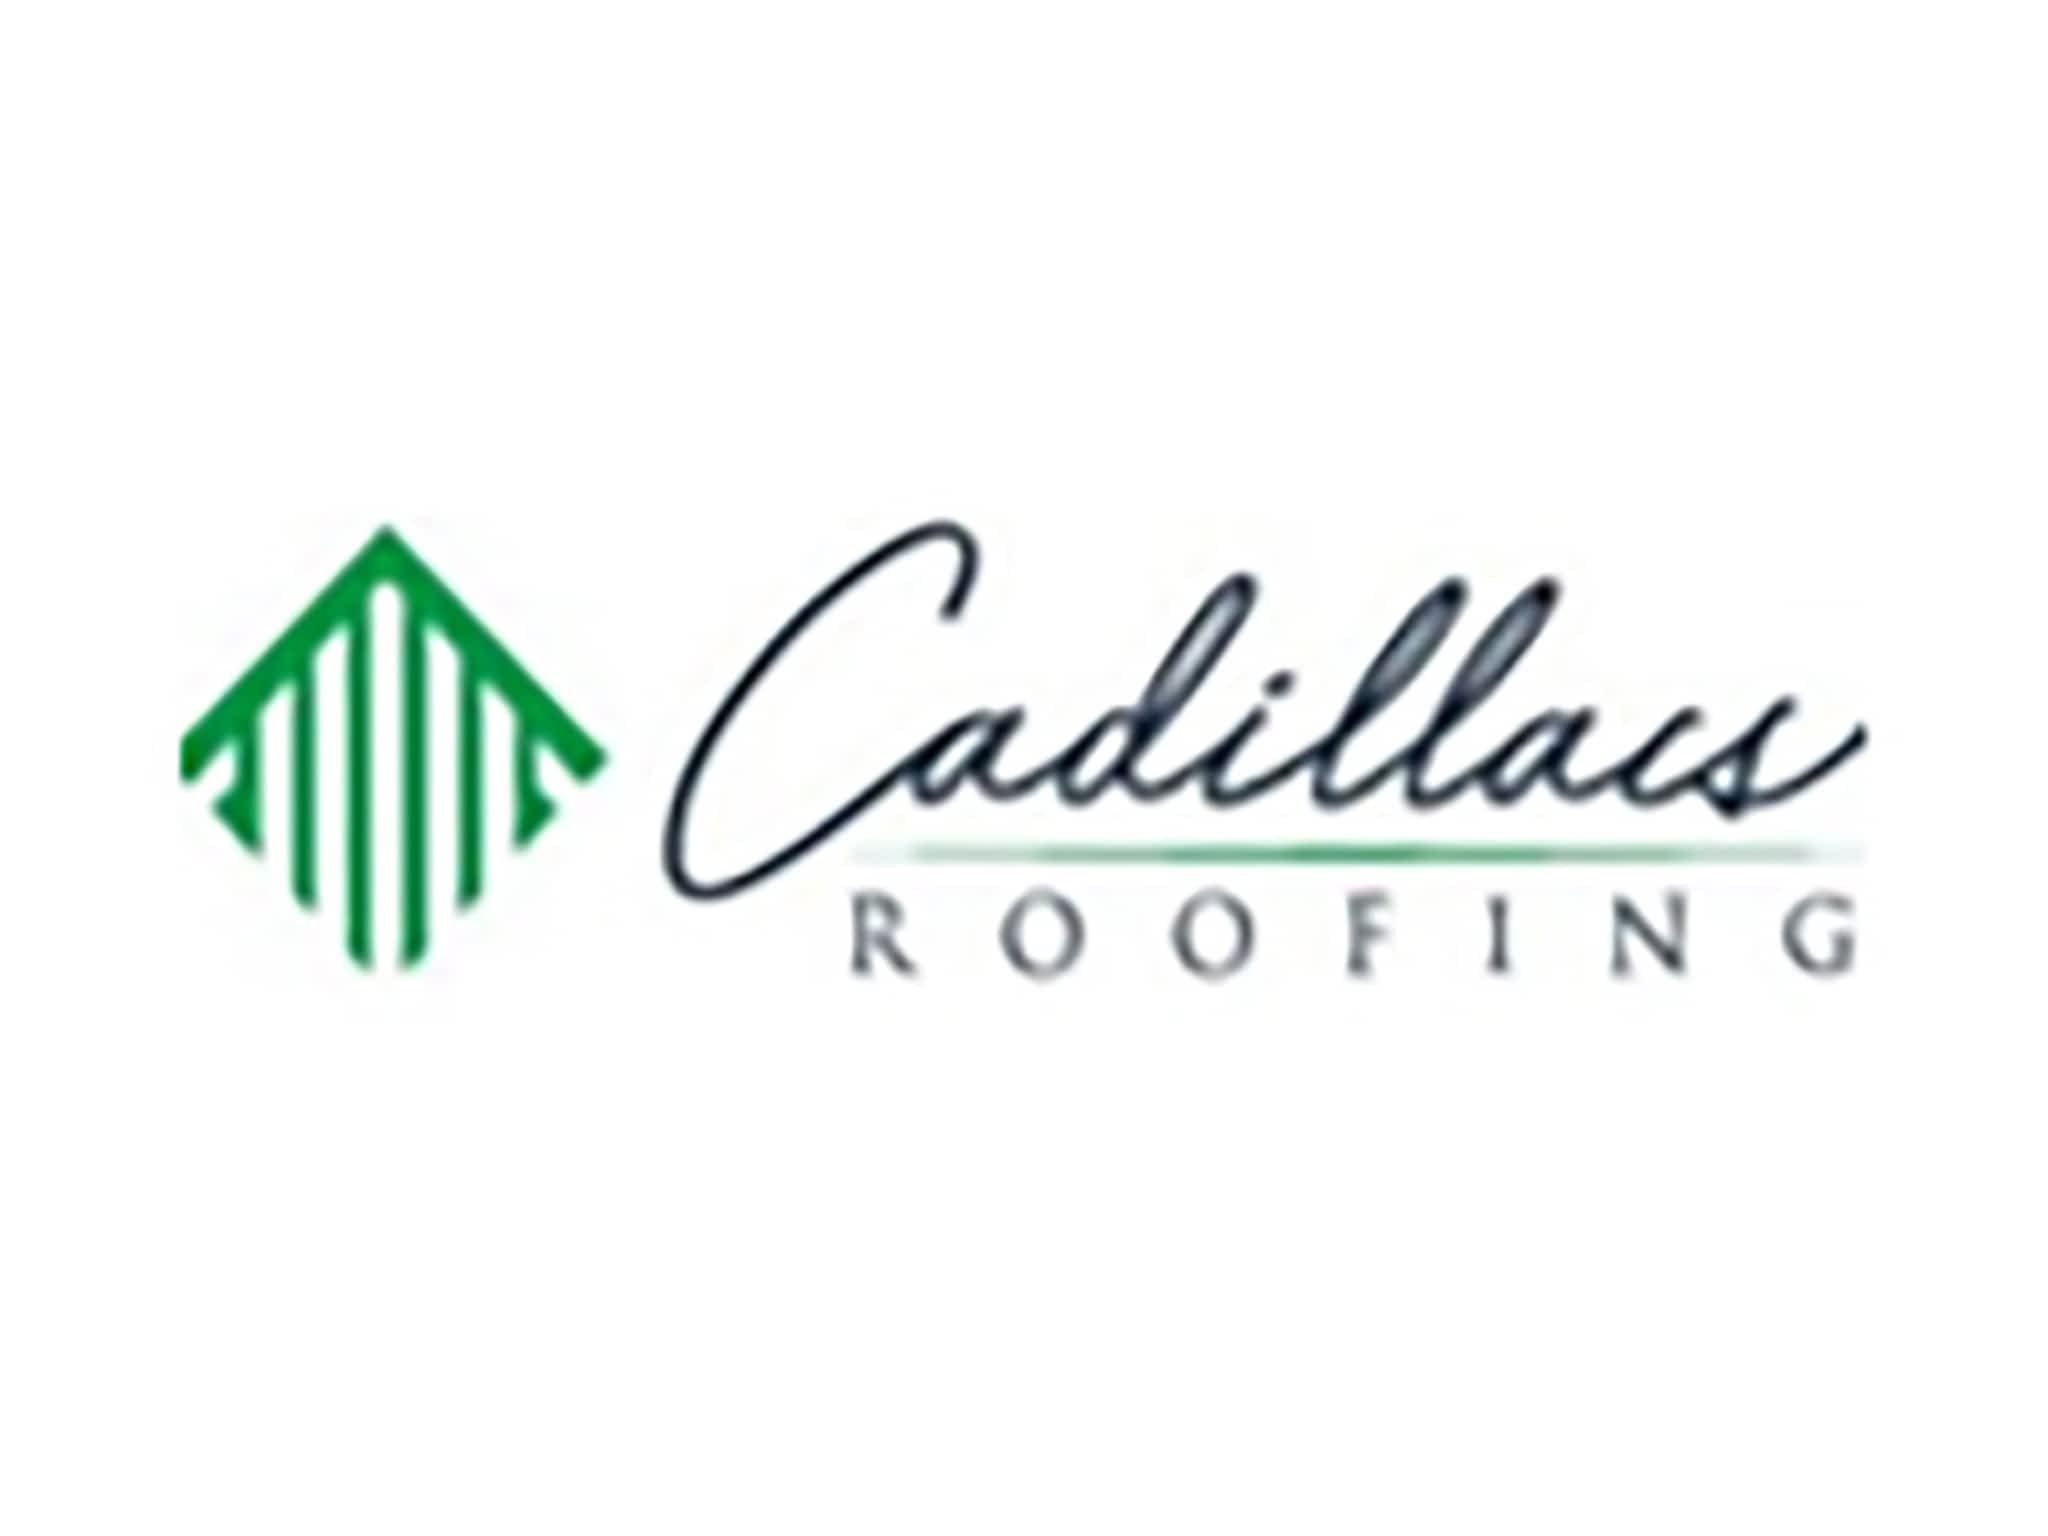 photo Cadillac Roofing Inc